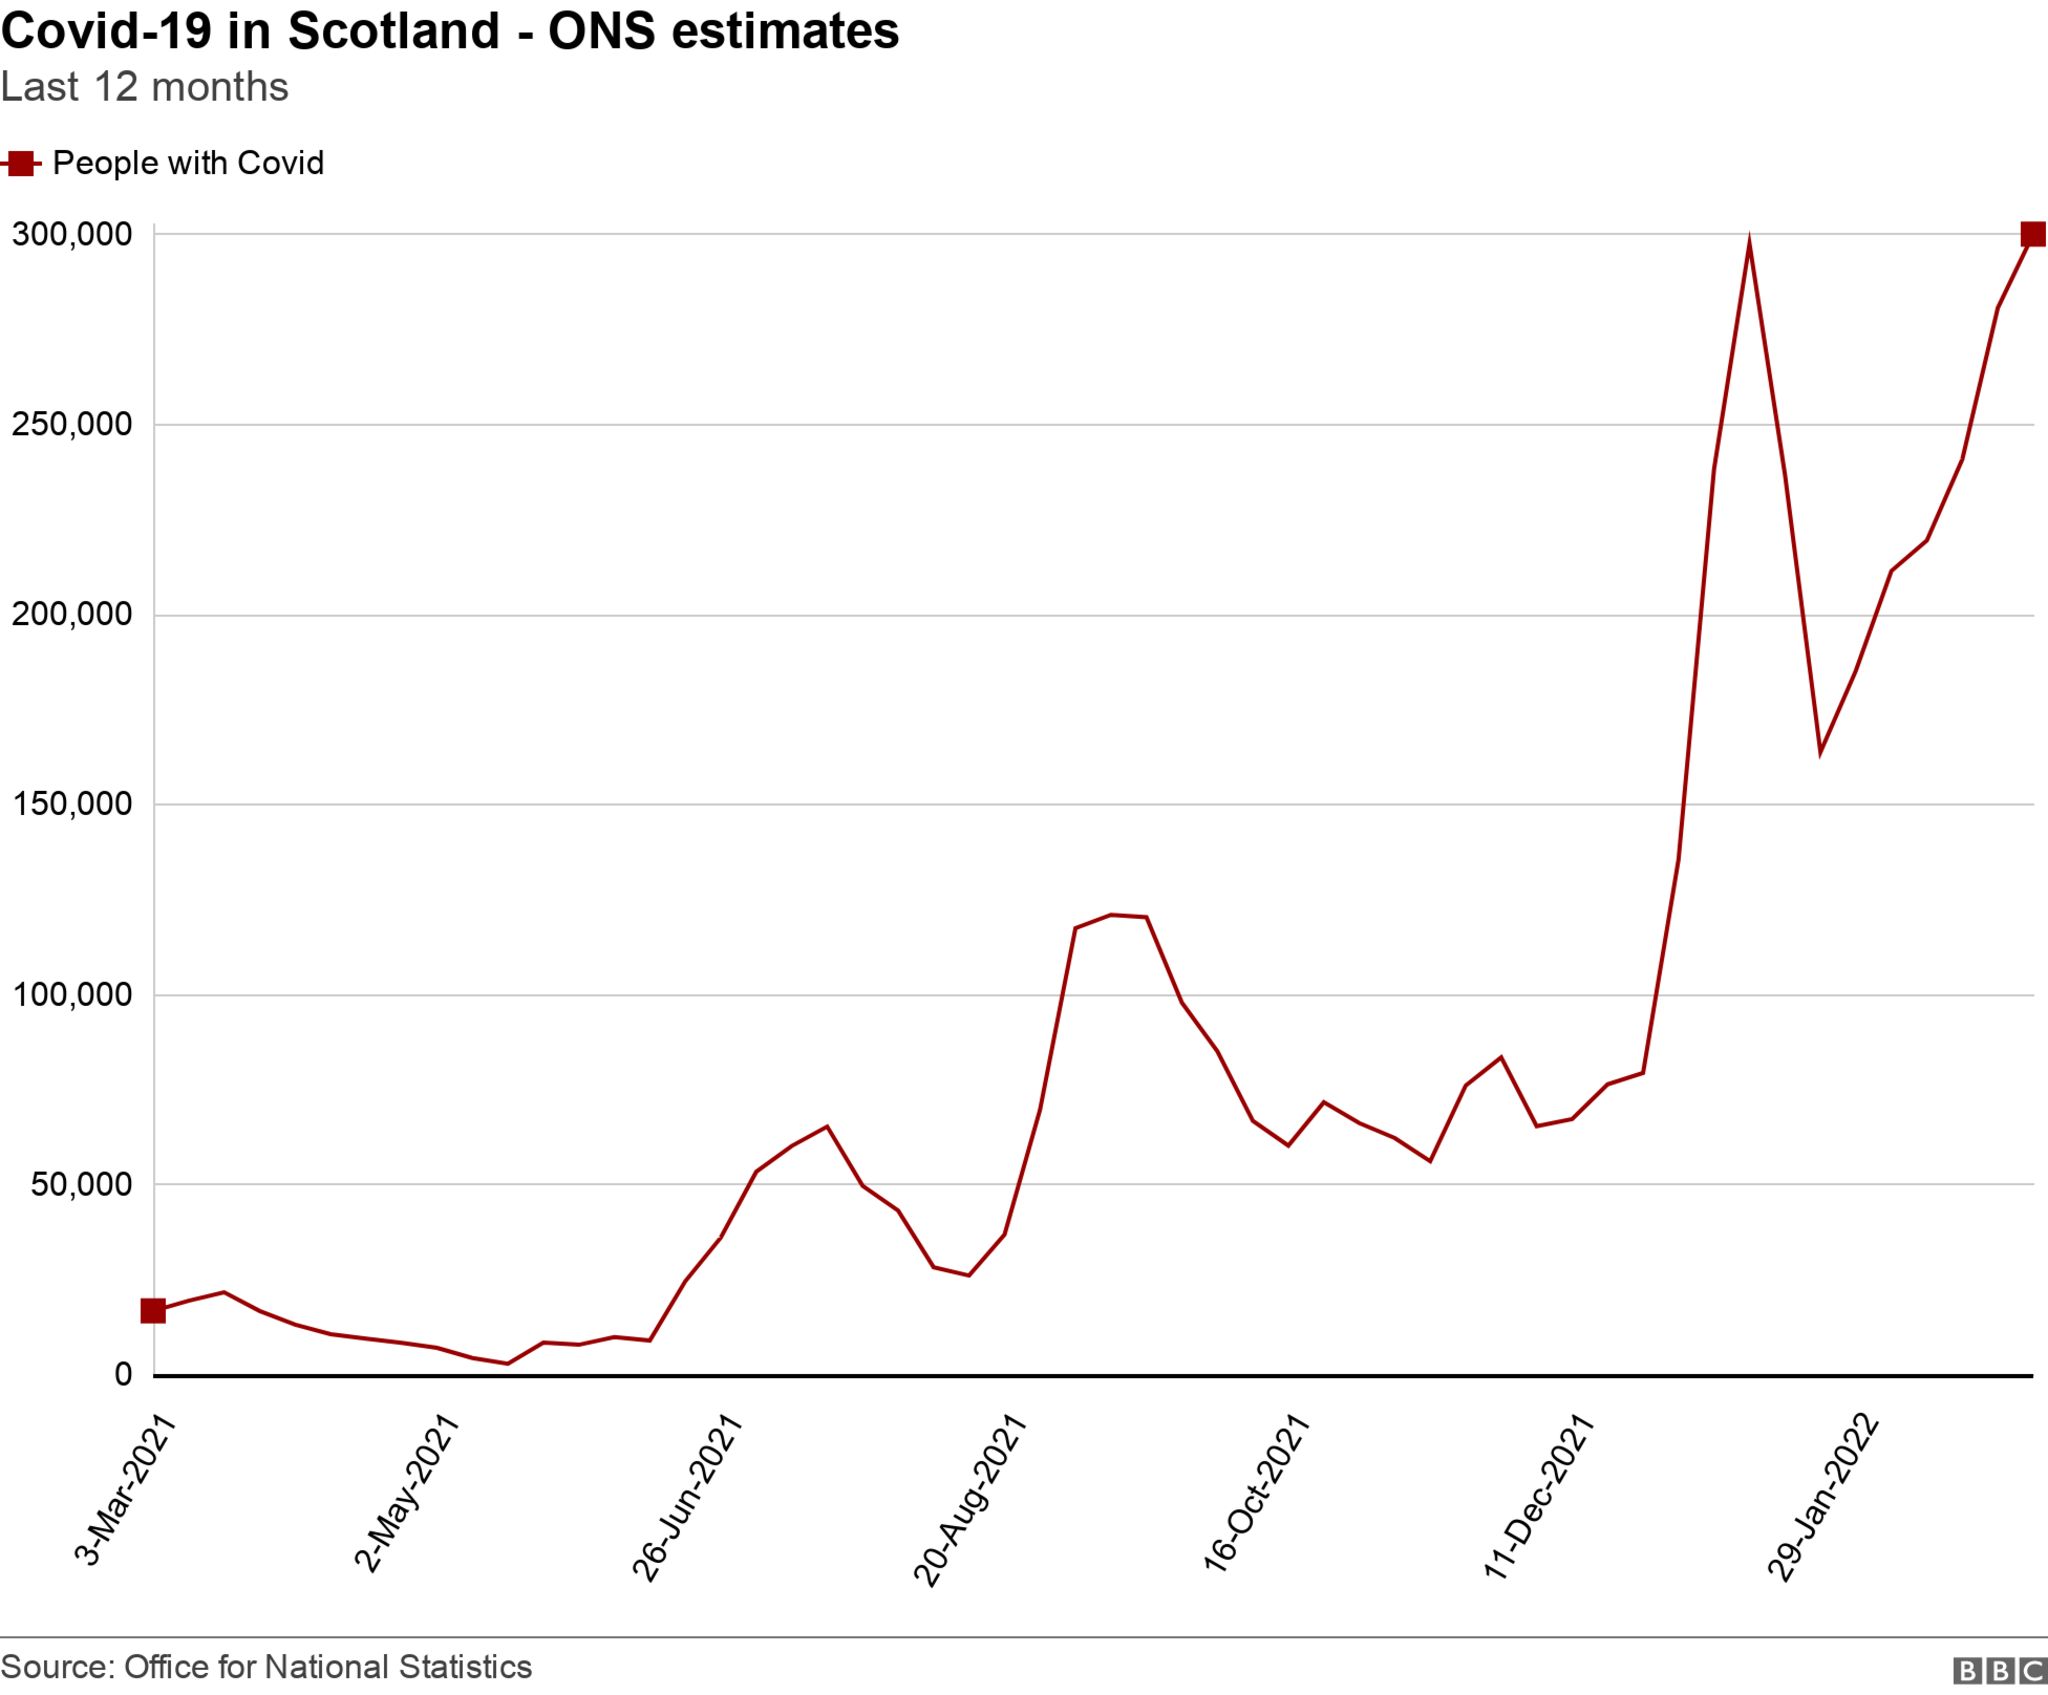 Covid in Scotland ONS data